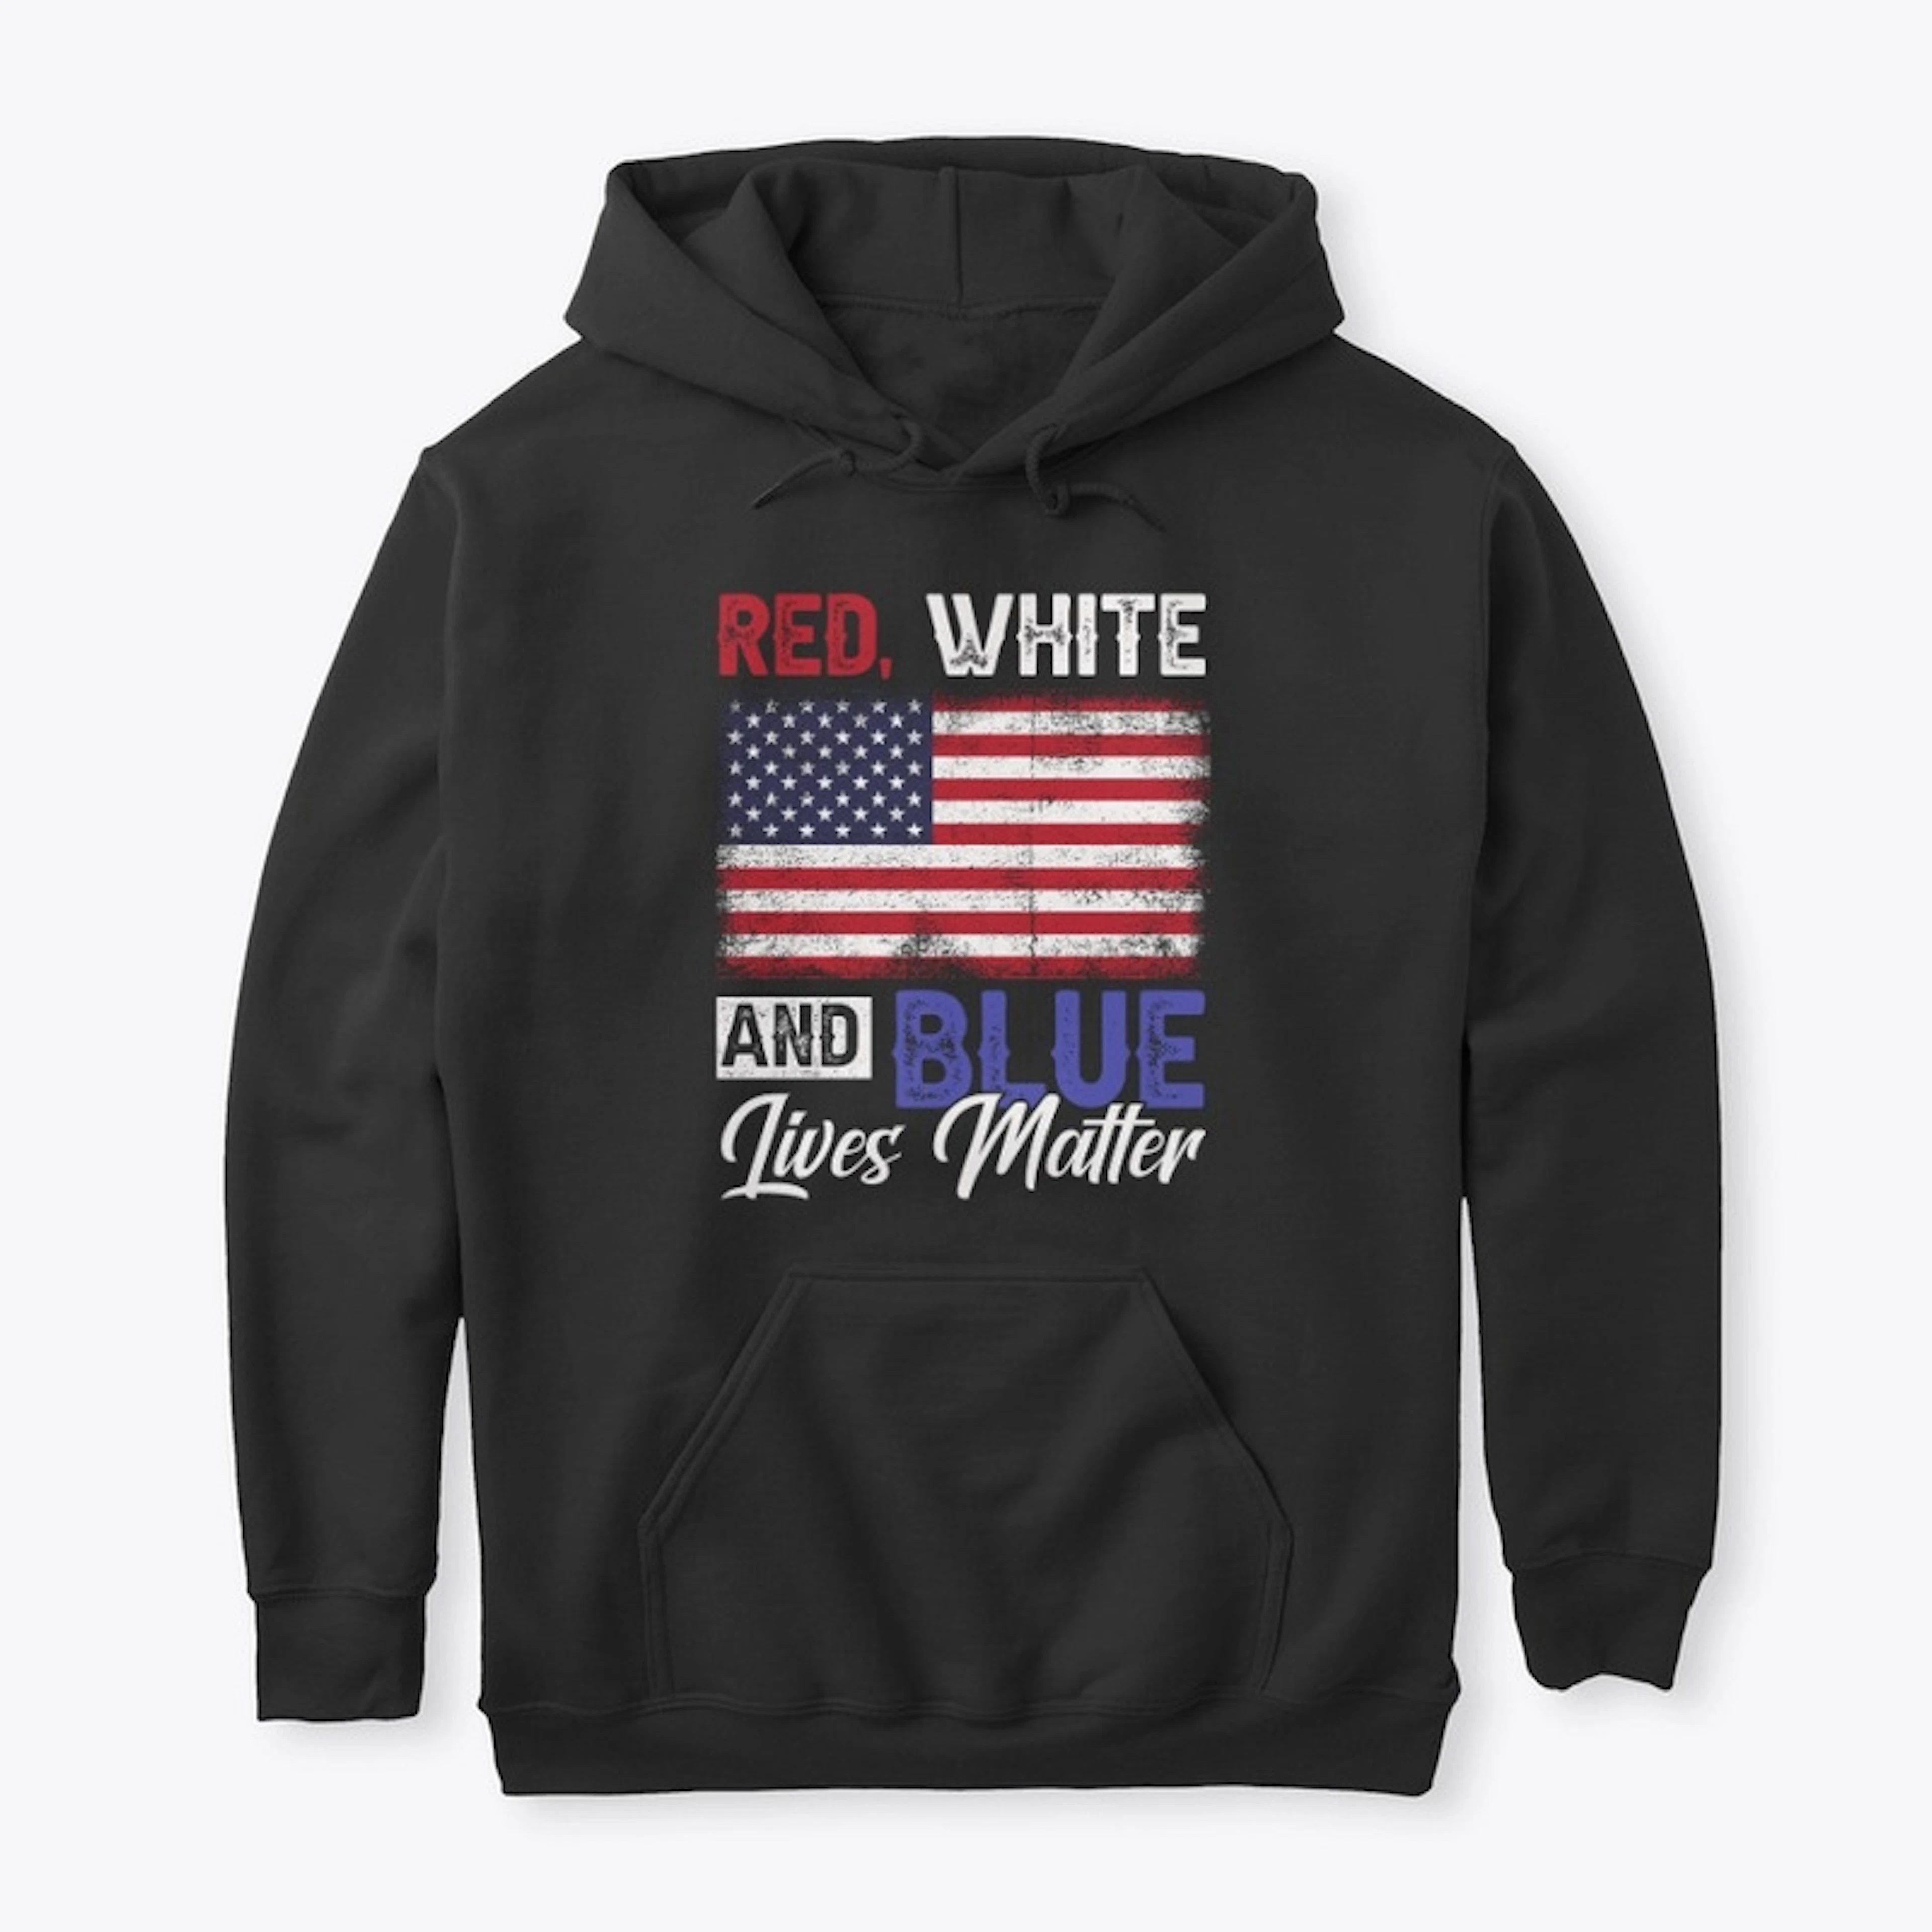 Red, White, And Blue Lives Matter